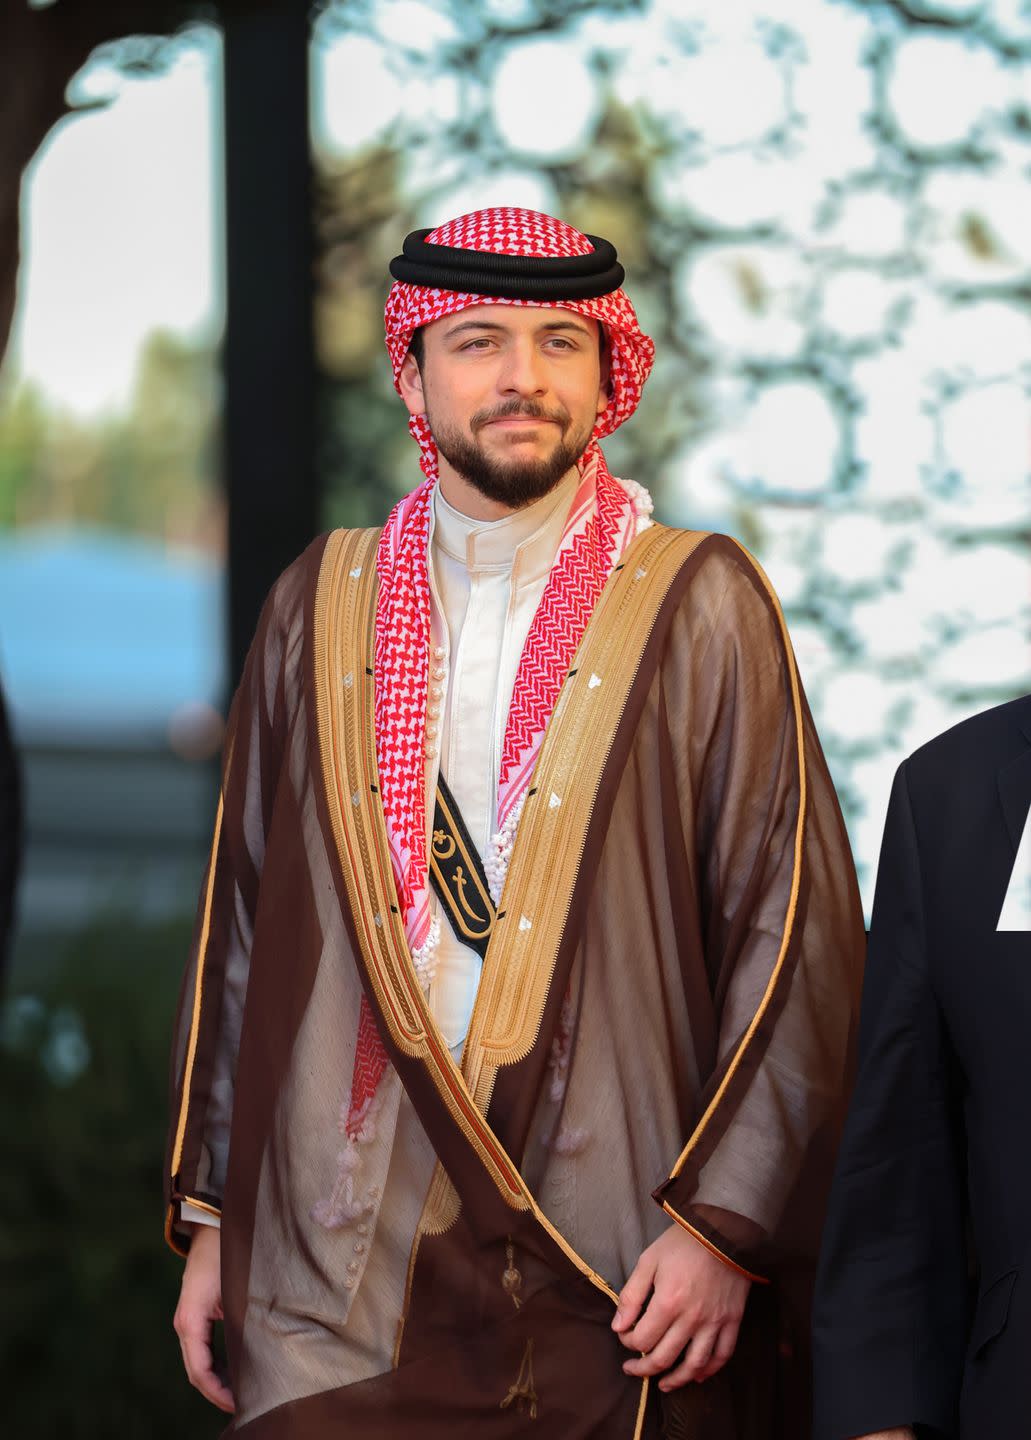 from the dinner banquet held by his majesty king abdullah ii on the occasion of his royal highness crown prince al hussein’s wedding at madareb bani hashem, at the royal hashemite court